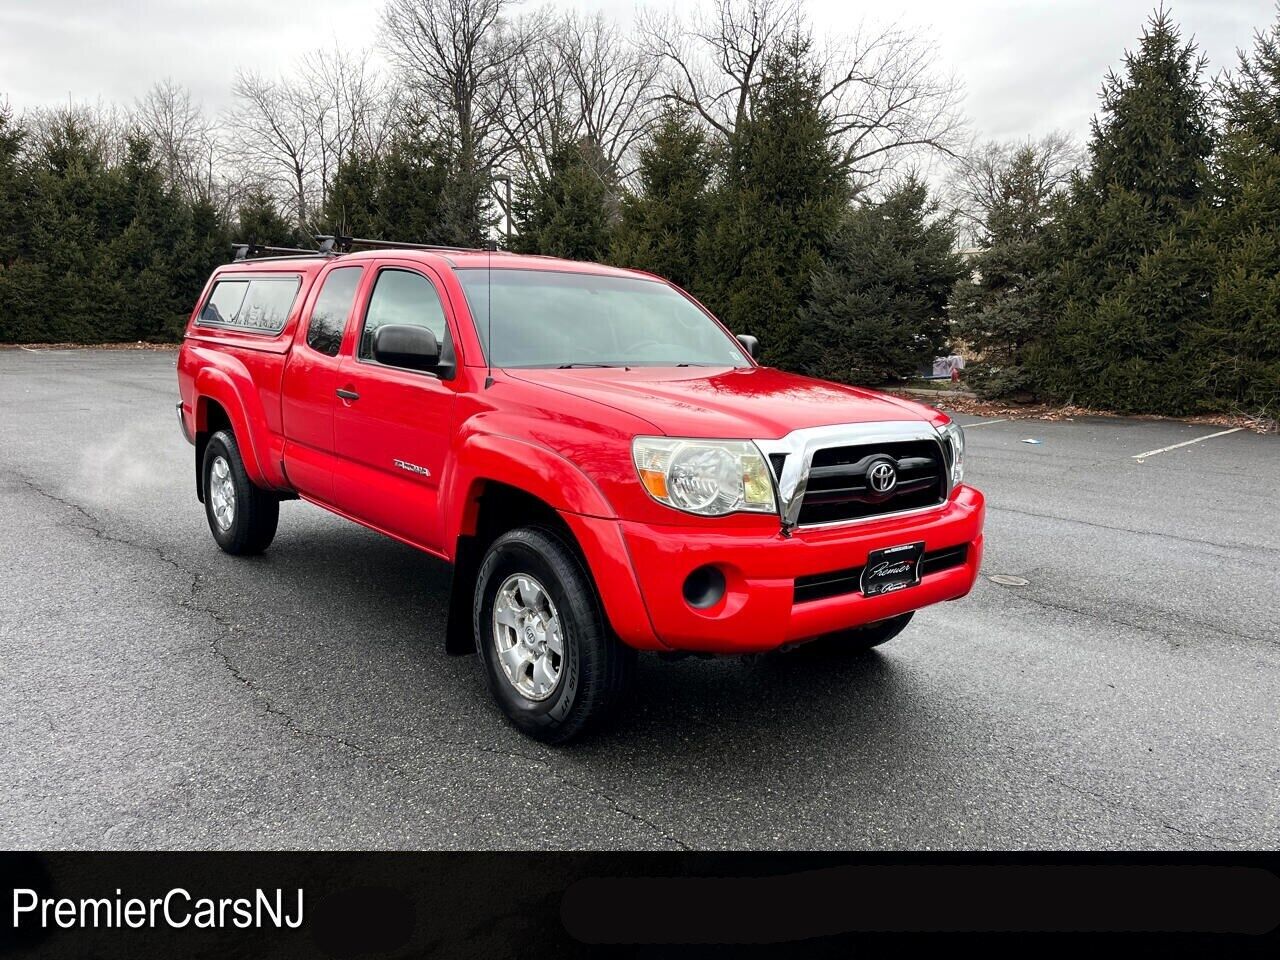 2008 Toyota Tacoma, Red with 180107 Miles available now!